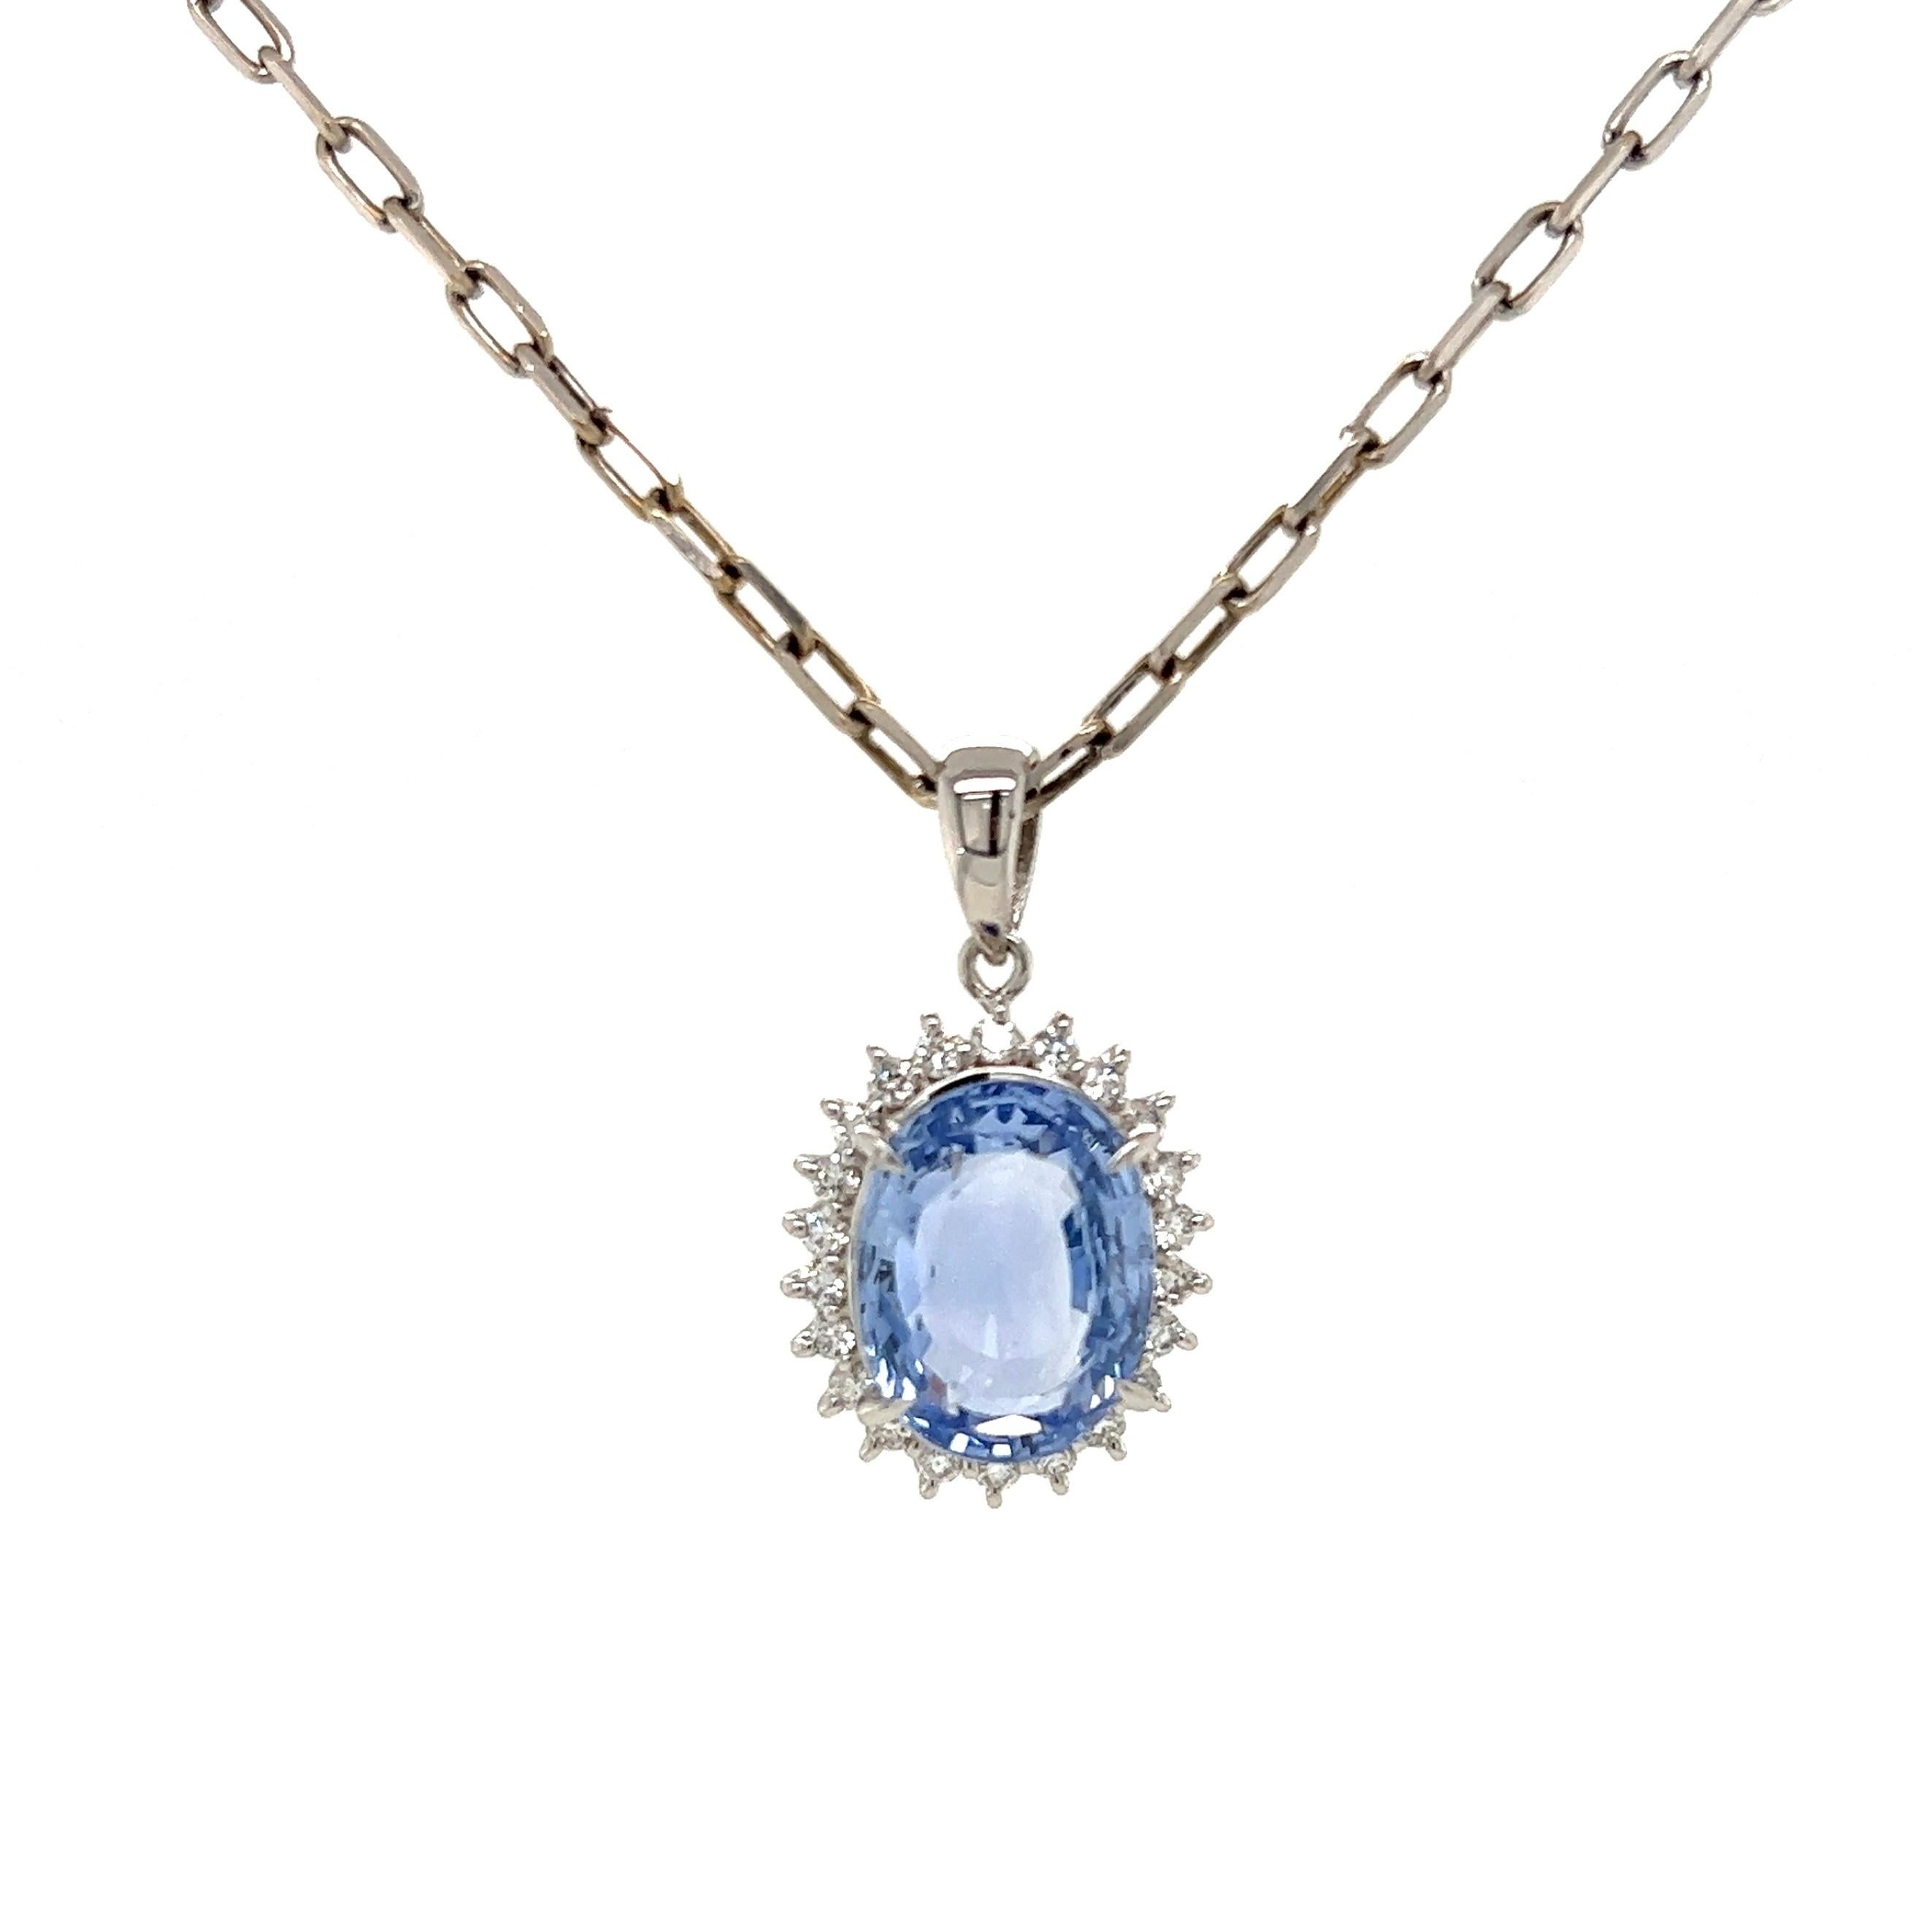 Simply Beautiful! Sapphire and Diamond Platinum Drop Pendant Necklace. Center securely Hand set with a 6.00 Carat Oval NO HEAT Sapphire GIA # 2223255132. Surrounded by Diamonds approx. 0.35tcw. Pendant dimensions: 0.97” L x 0.55” W x 0.27” D.